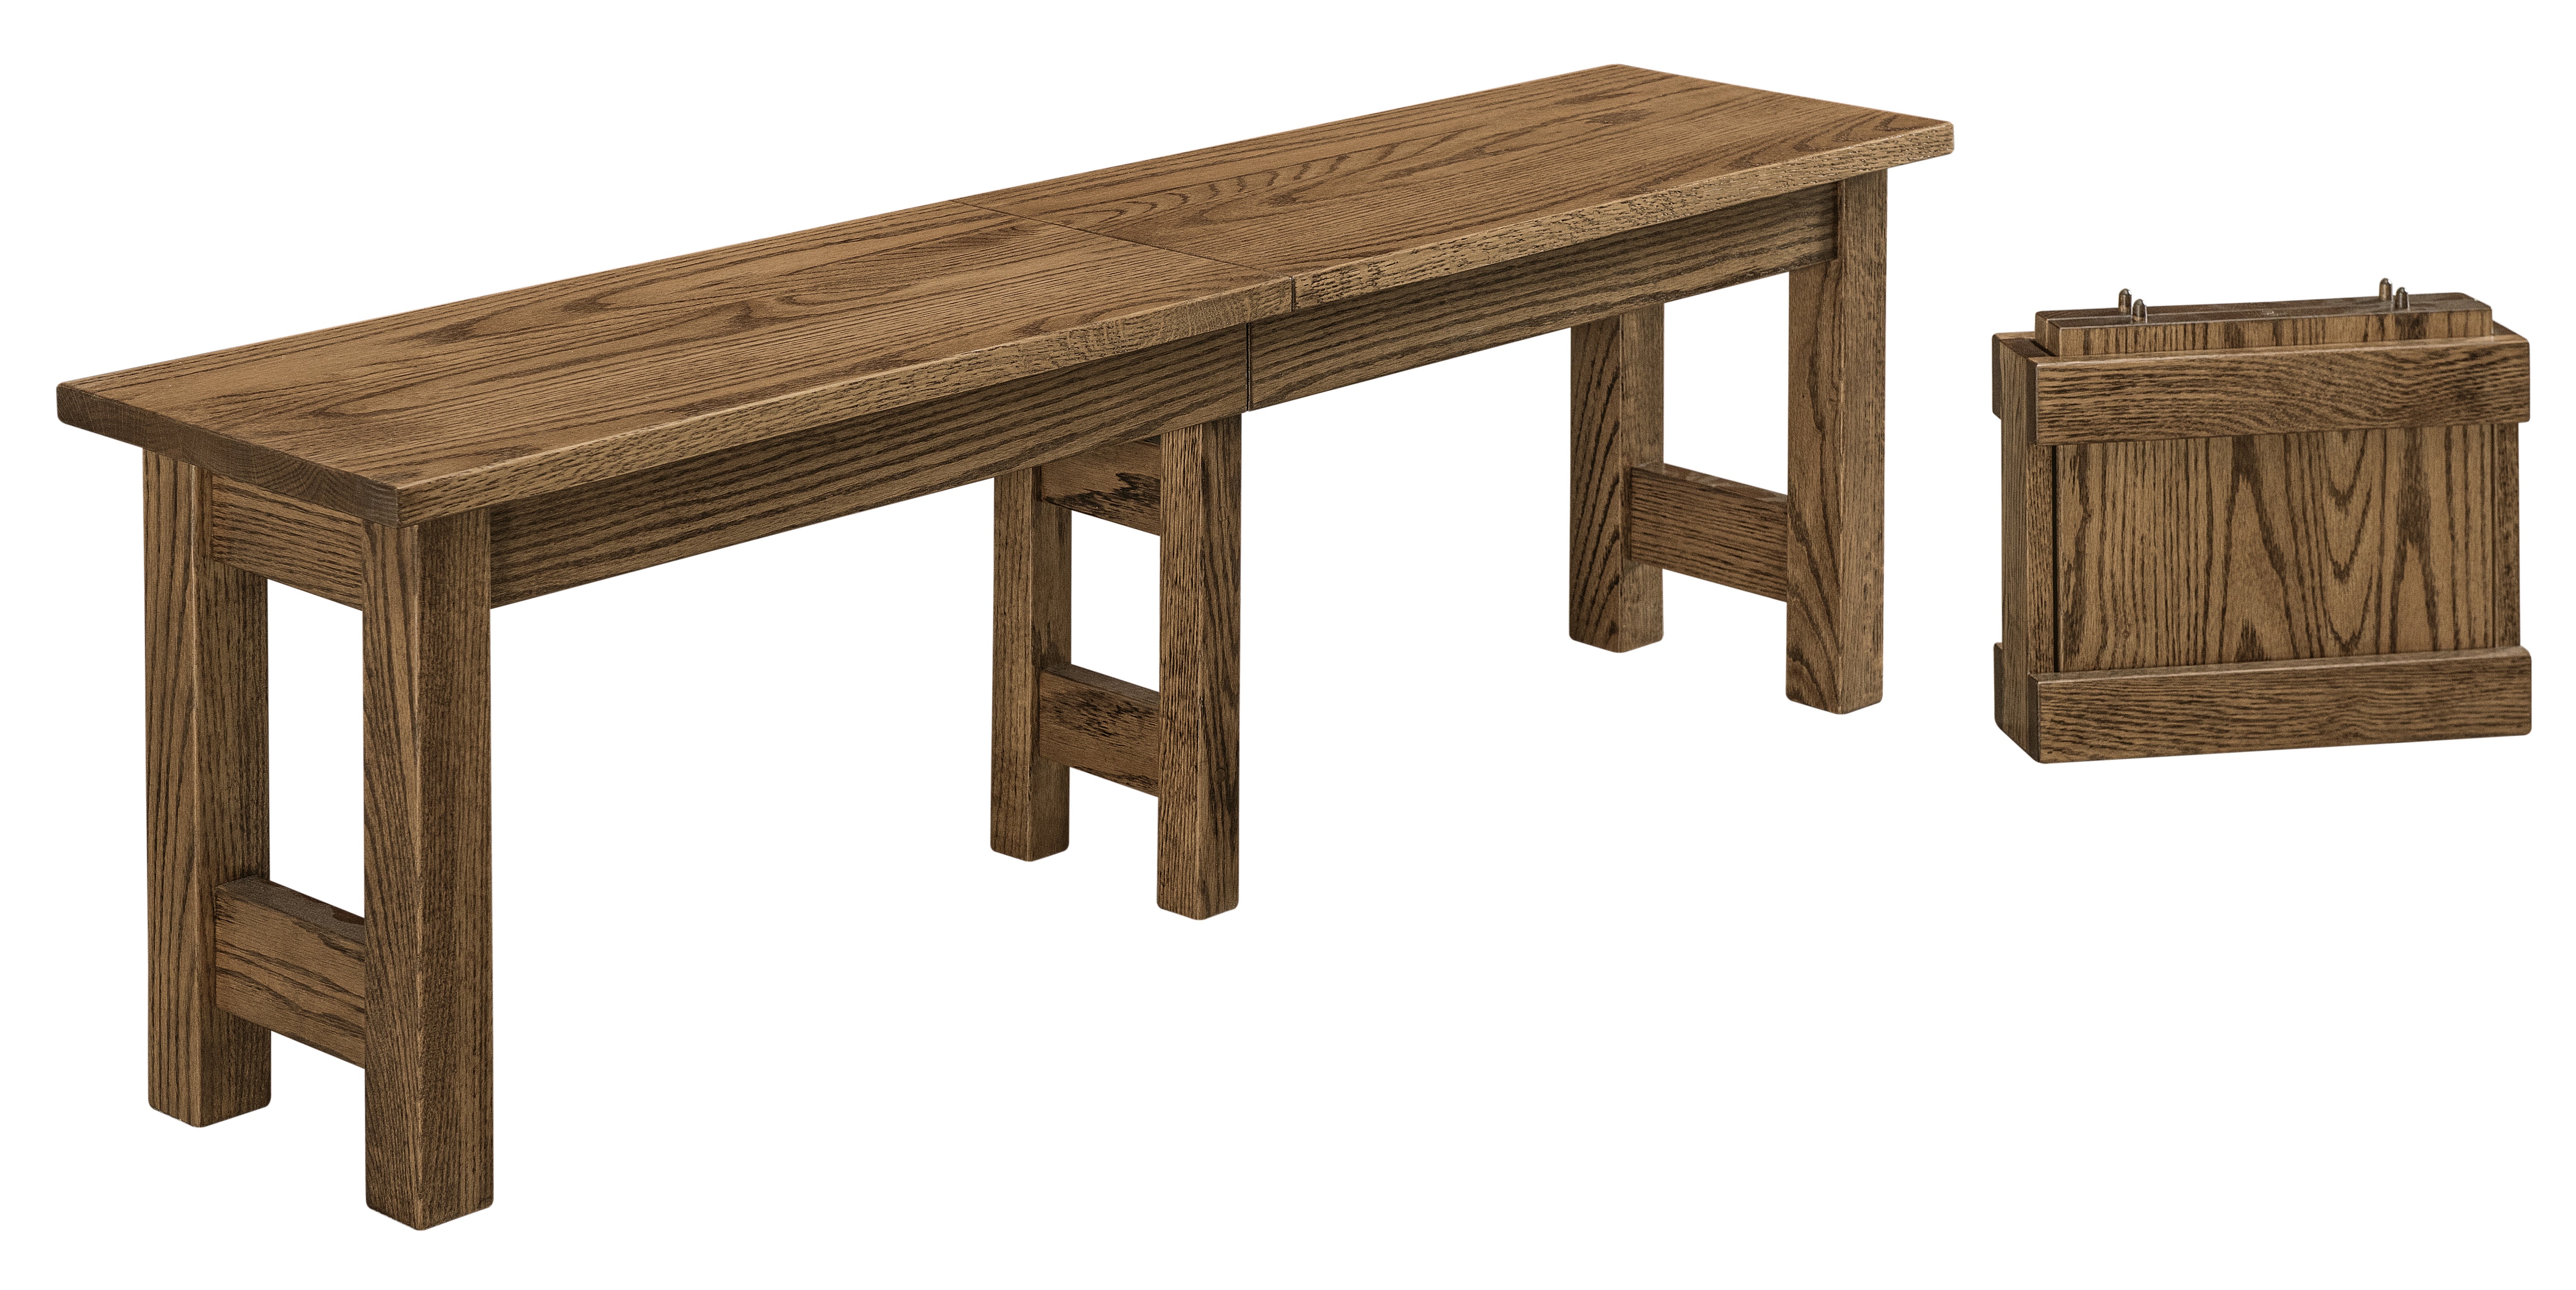 amish logan bench shown in red oak with almond stain 